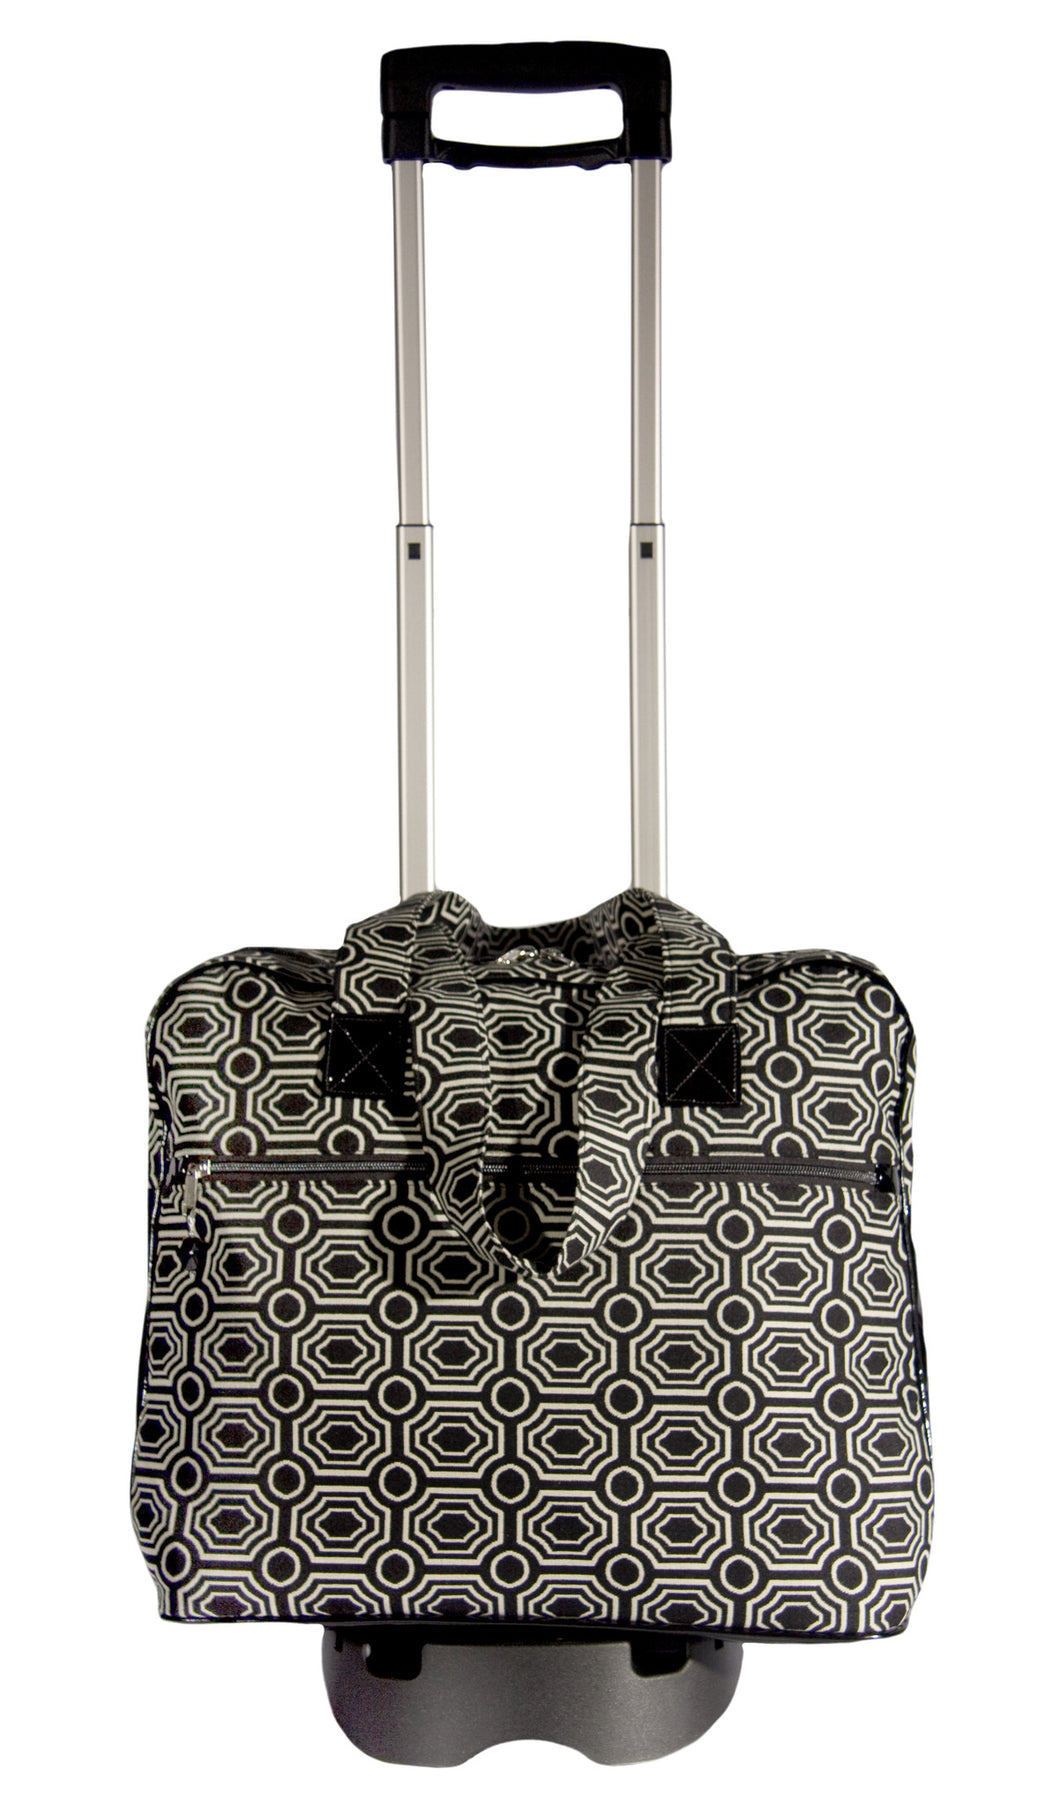 L759-1423 Trolley Tote Bradstreet Ebony w Trolley Cart trimmed w Black Patent. Spacious Interior Tote Double Straps and Removable Trolley Cart. Part of the Cosmetic and Travel Collection 10